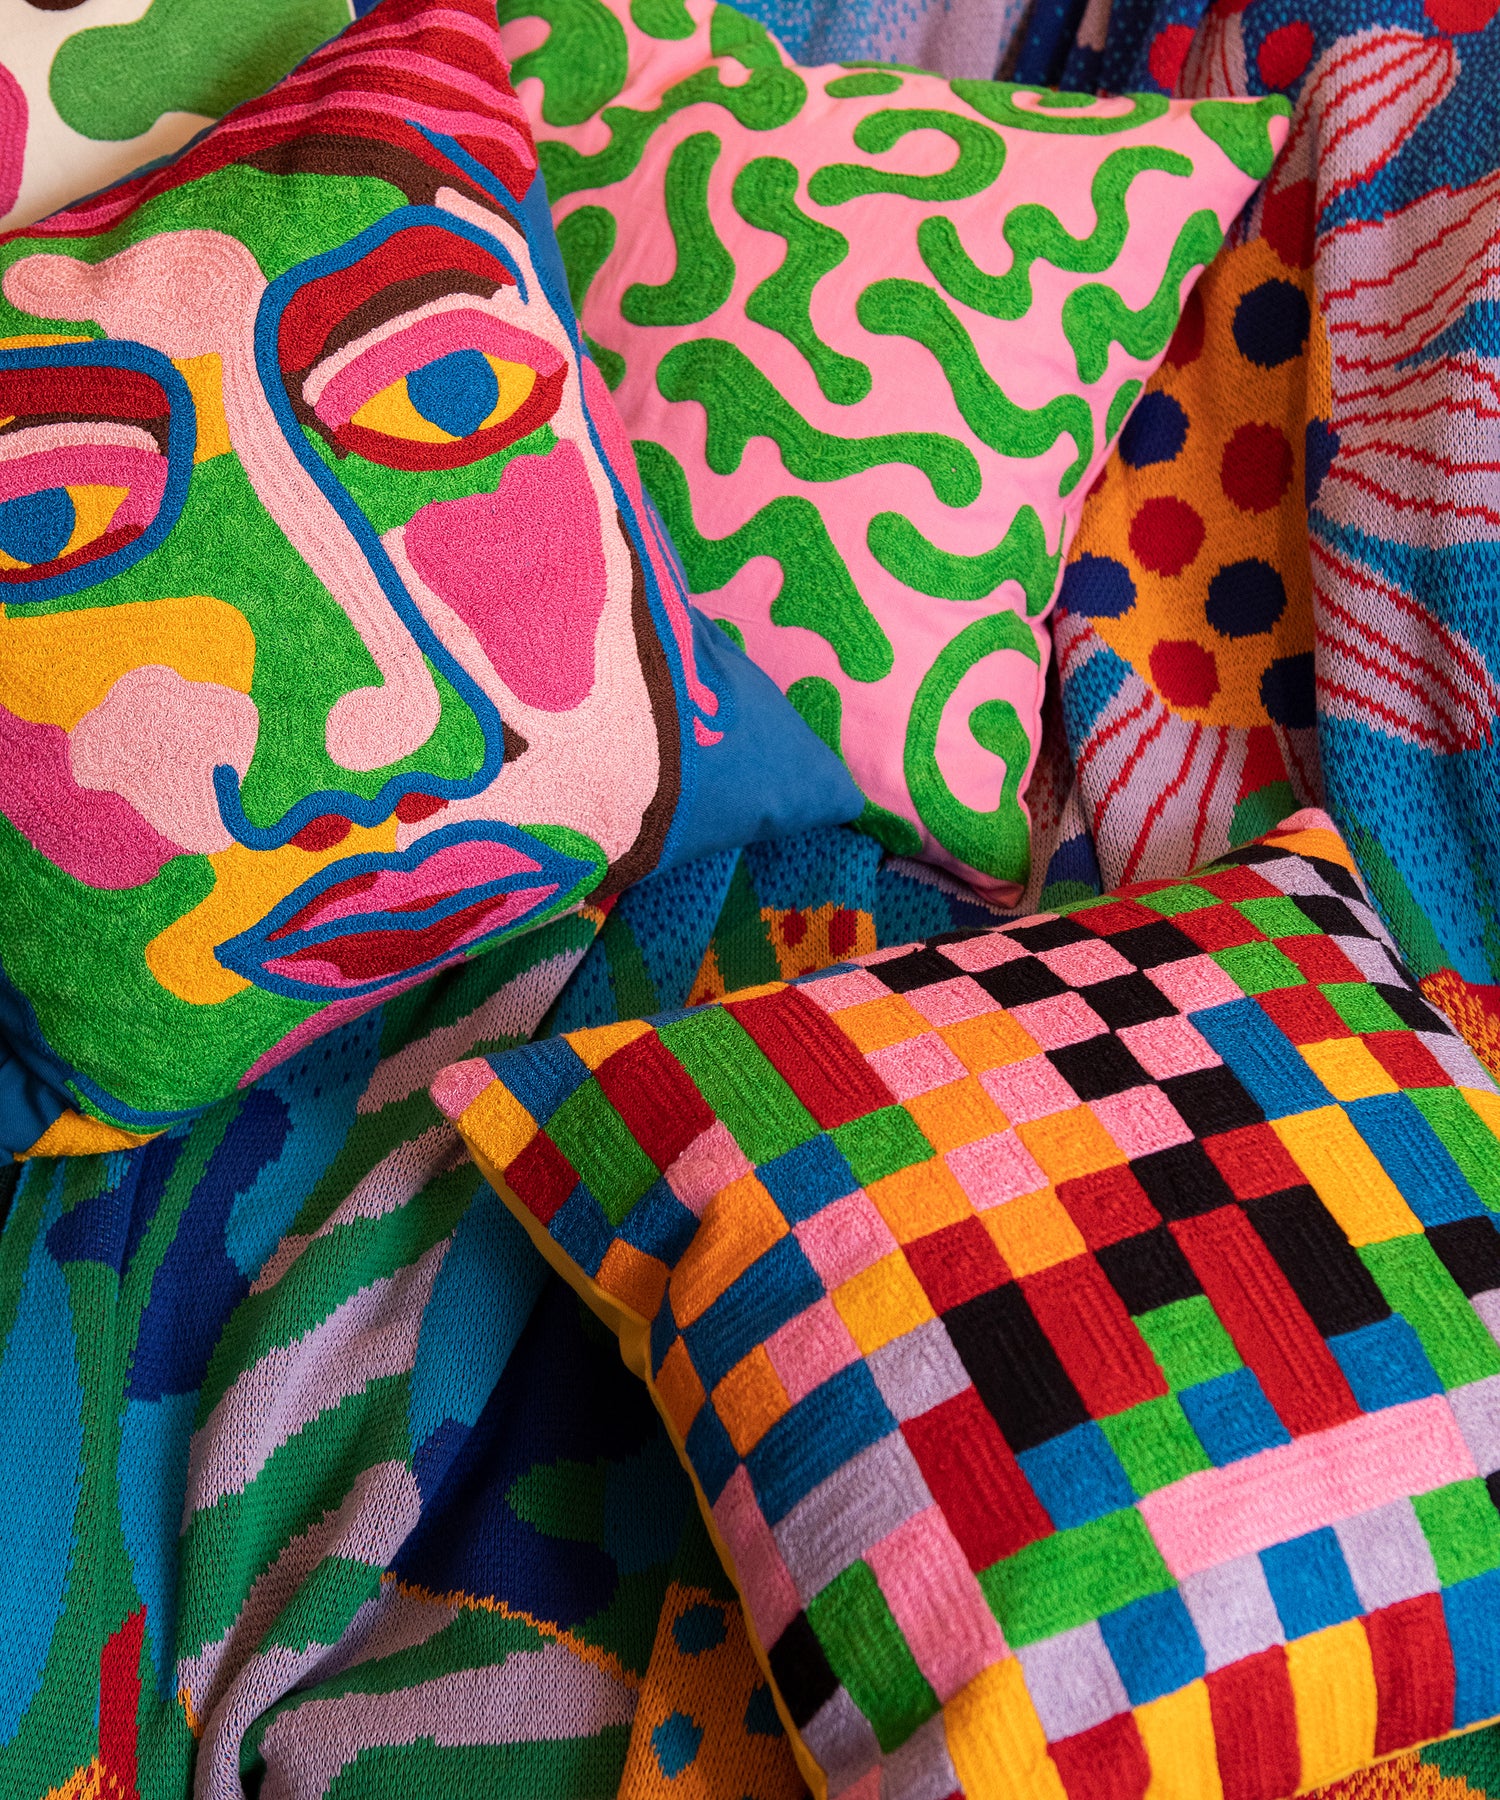 Detail of Silly Squiggles pillow laying on top of the Best Buds Blanket next to the Pixels and Portrait Pillows.